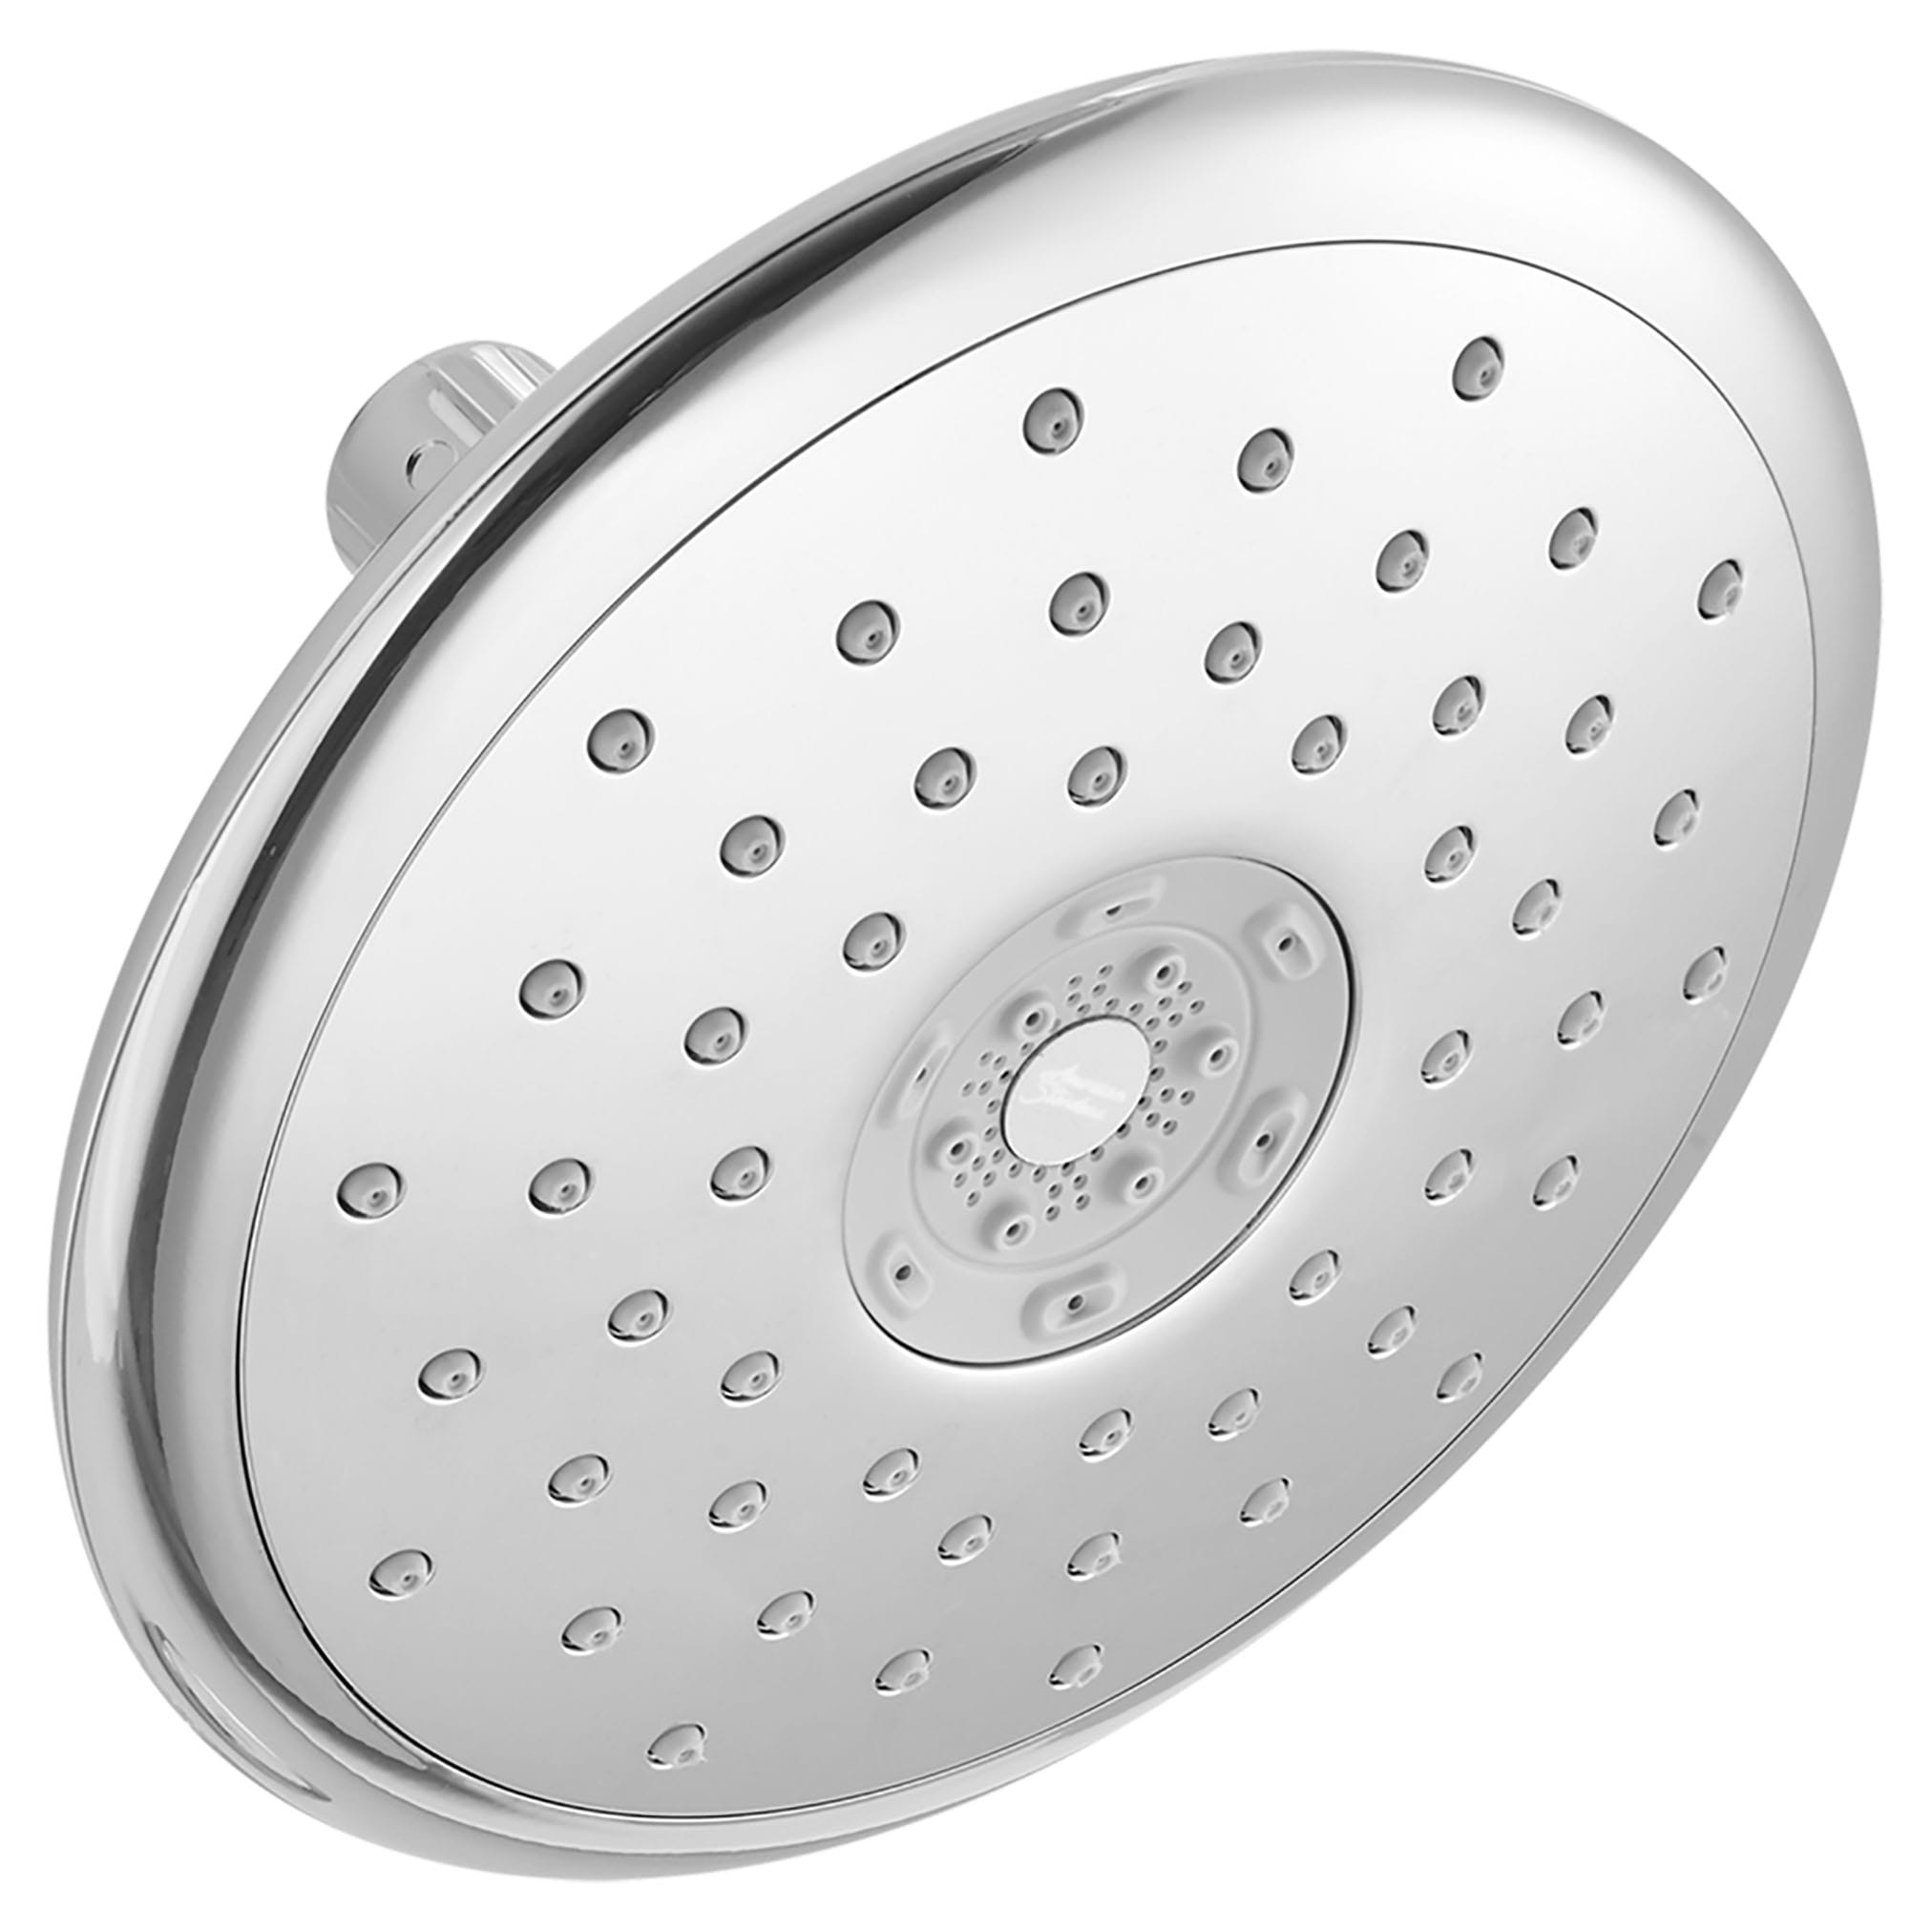 Spectra Touch 7-3/16-in. 1.8 GPM 4-Function Water-Saving Shower Head